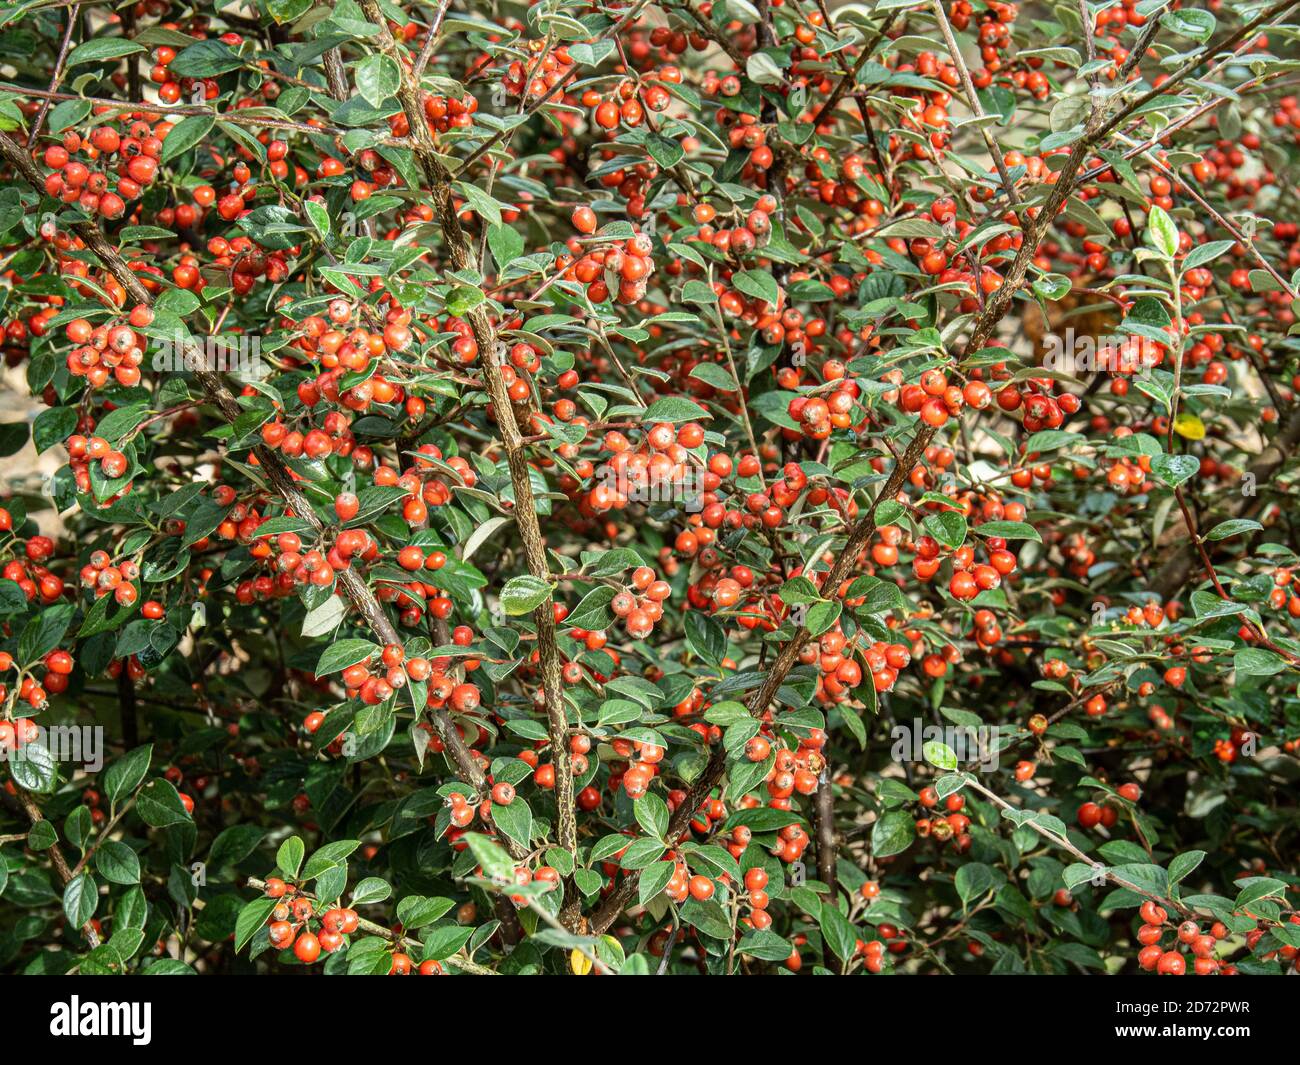 The bright red berries and the silvery green evergreen foliage of Cotoneaster lacteus providing a colourful autumn display Stock Photo